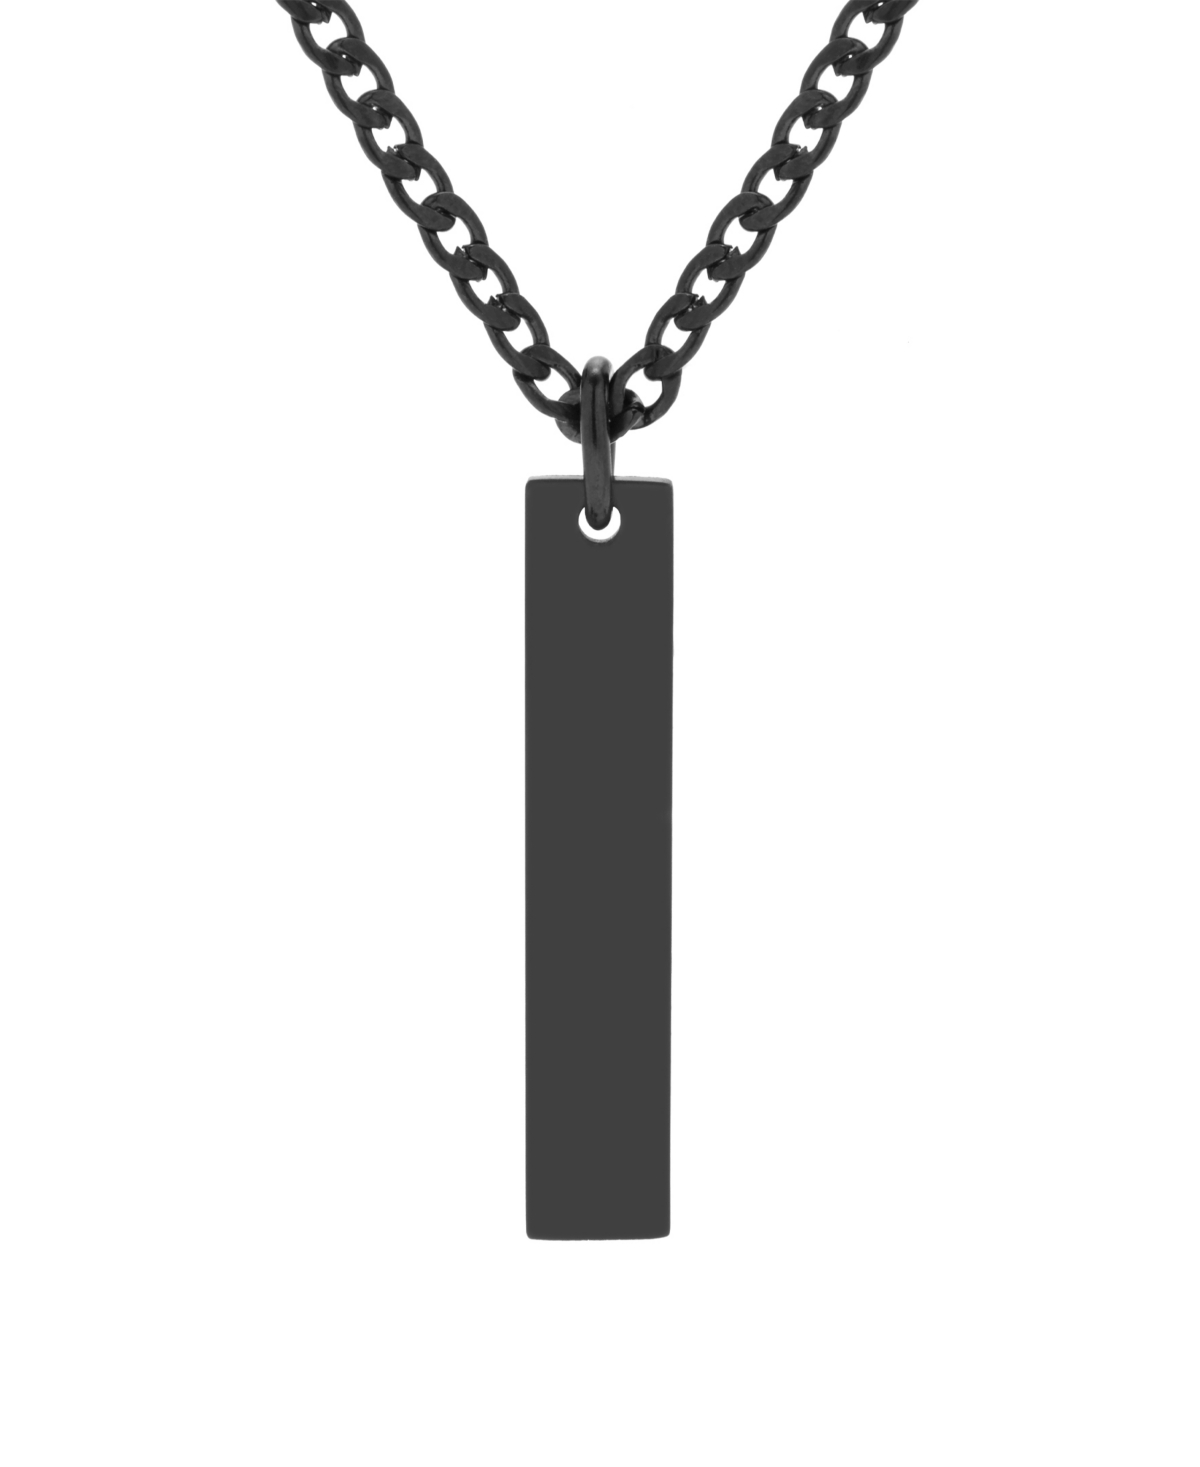 Eve's Jewelry Men's Black Plated Stainless Steel Vertical Pendant Necklace